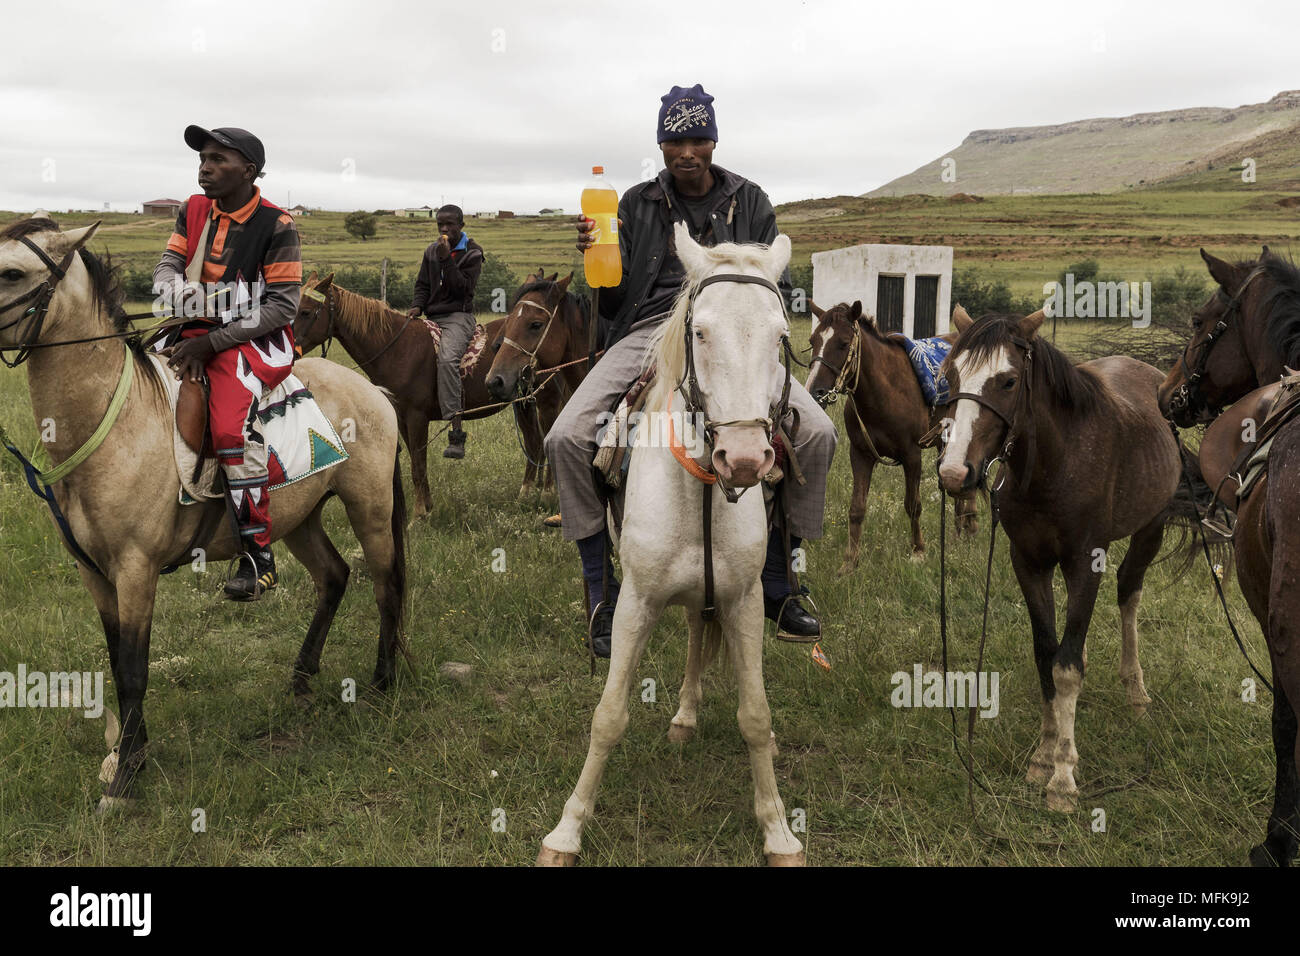 February 26, 2017 - Matatiele, Eastern Cape, South Africa - Xhosa and Sotho men from two neighbouring villages meet to participate in a horse race. (Credit Image: © Stefan Kleinowitz via ZUMA Wire) Stock Photo